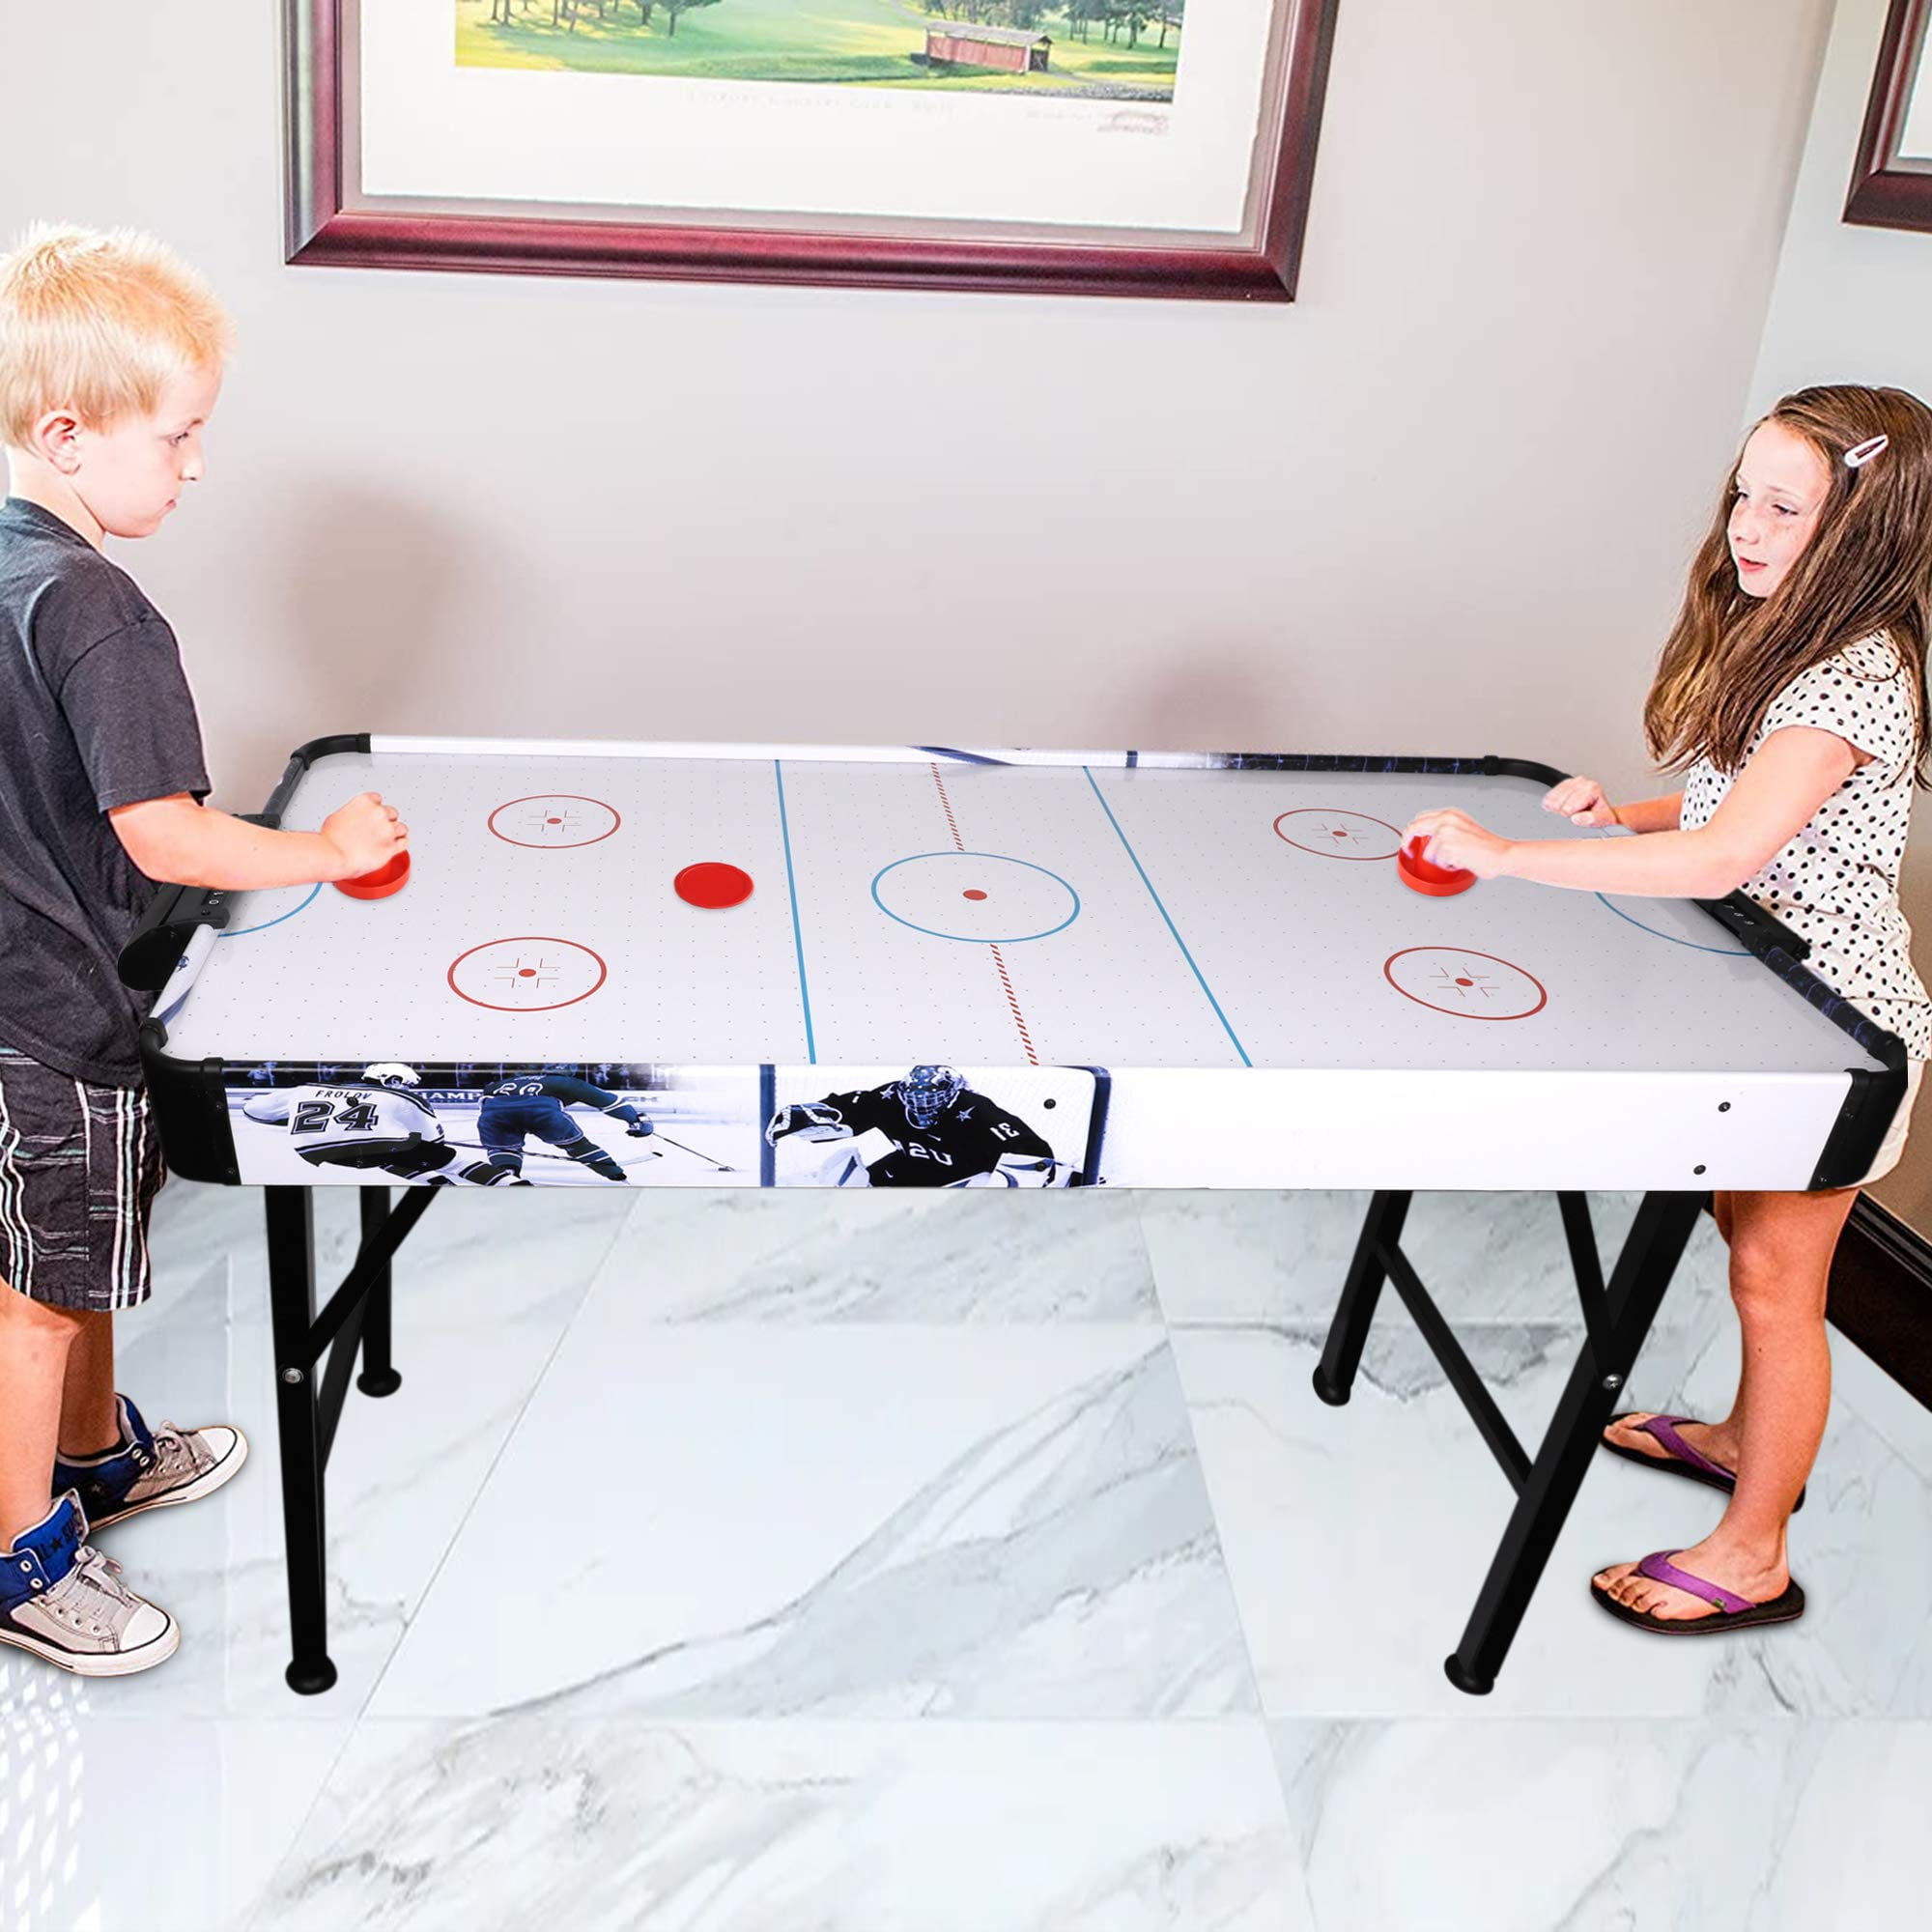 Best of Air hockey drinking game